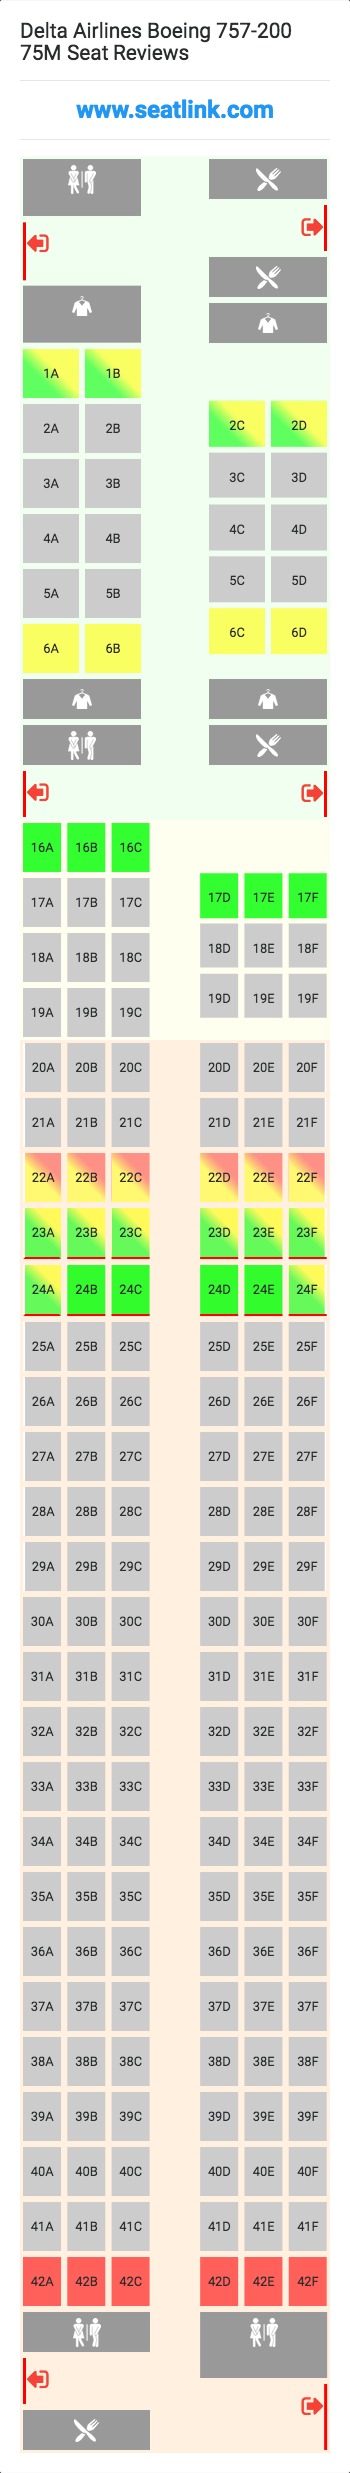 Delta Airlines Boeing 757-200 75M (752) Seat Map